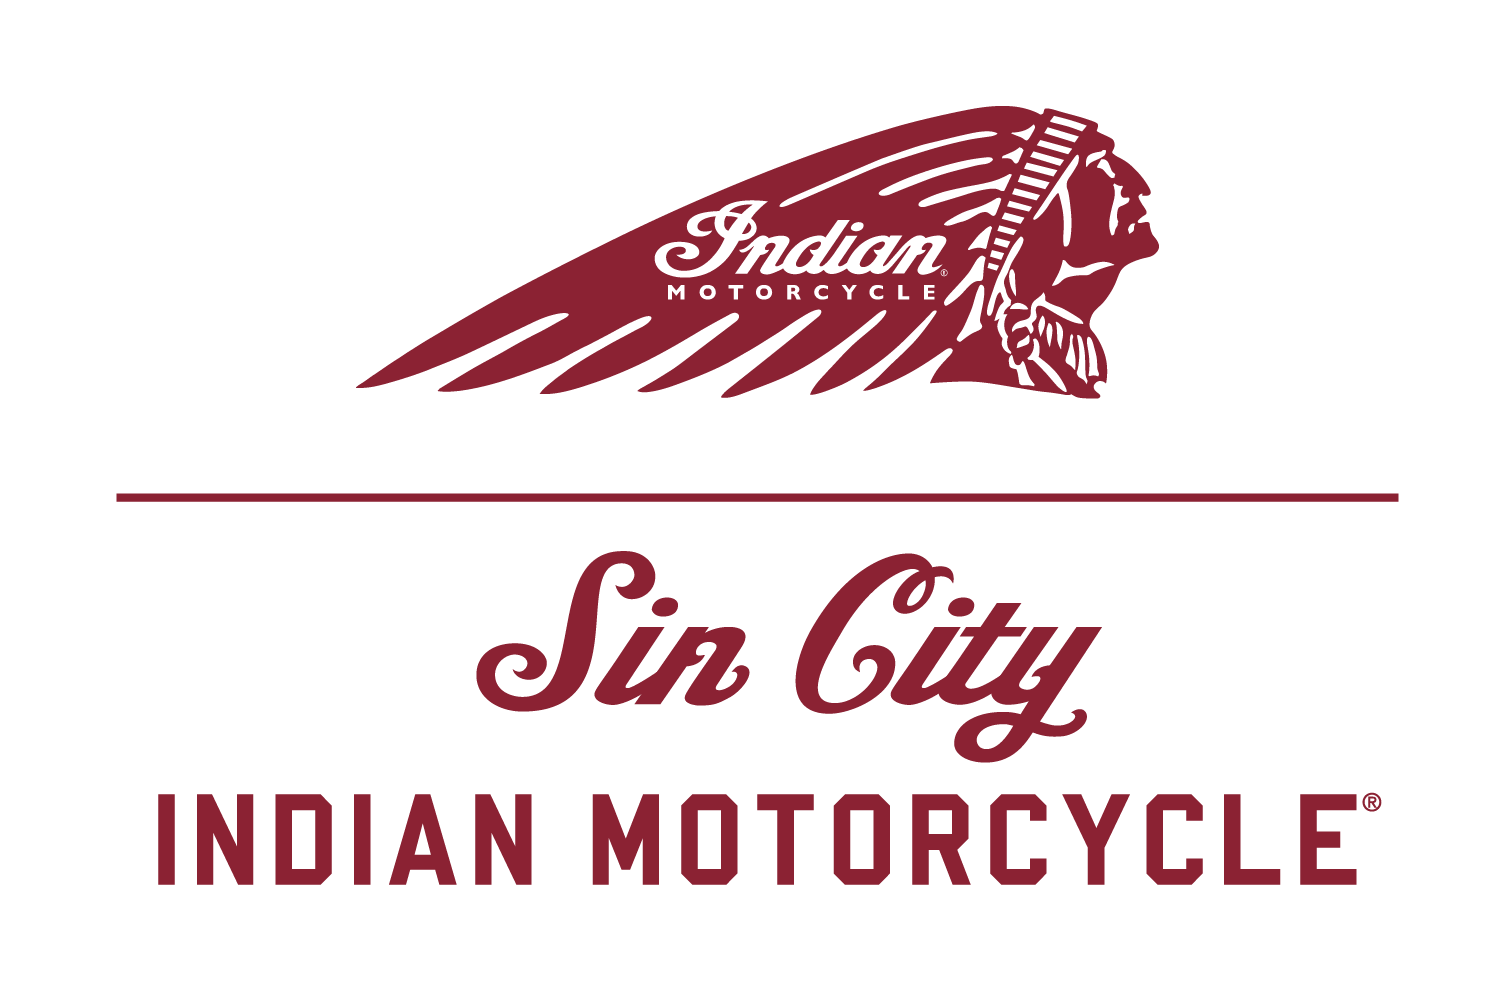 Indian Motorcycle® of Sin City